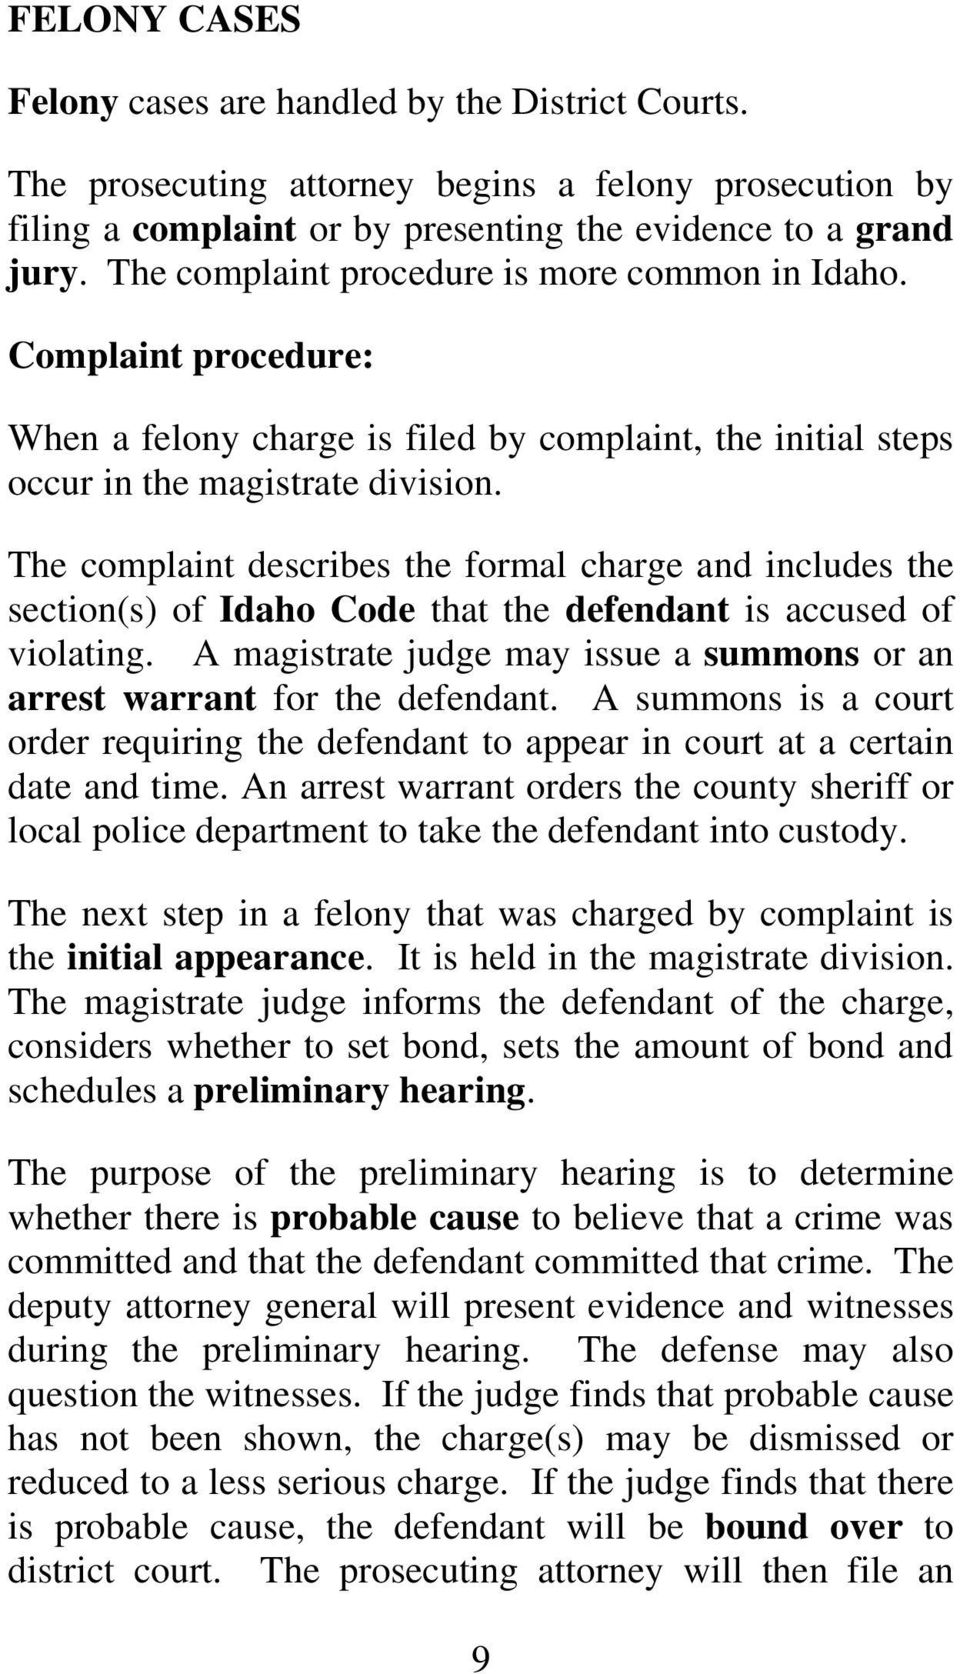 The complaint describes the formal charge and includes the section(s) of Idaho Code that the defendant is accused of violating.